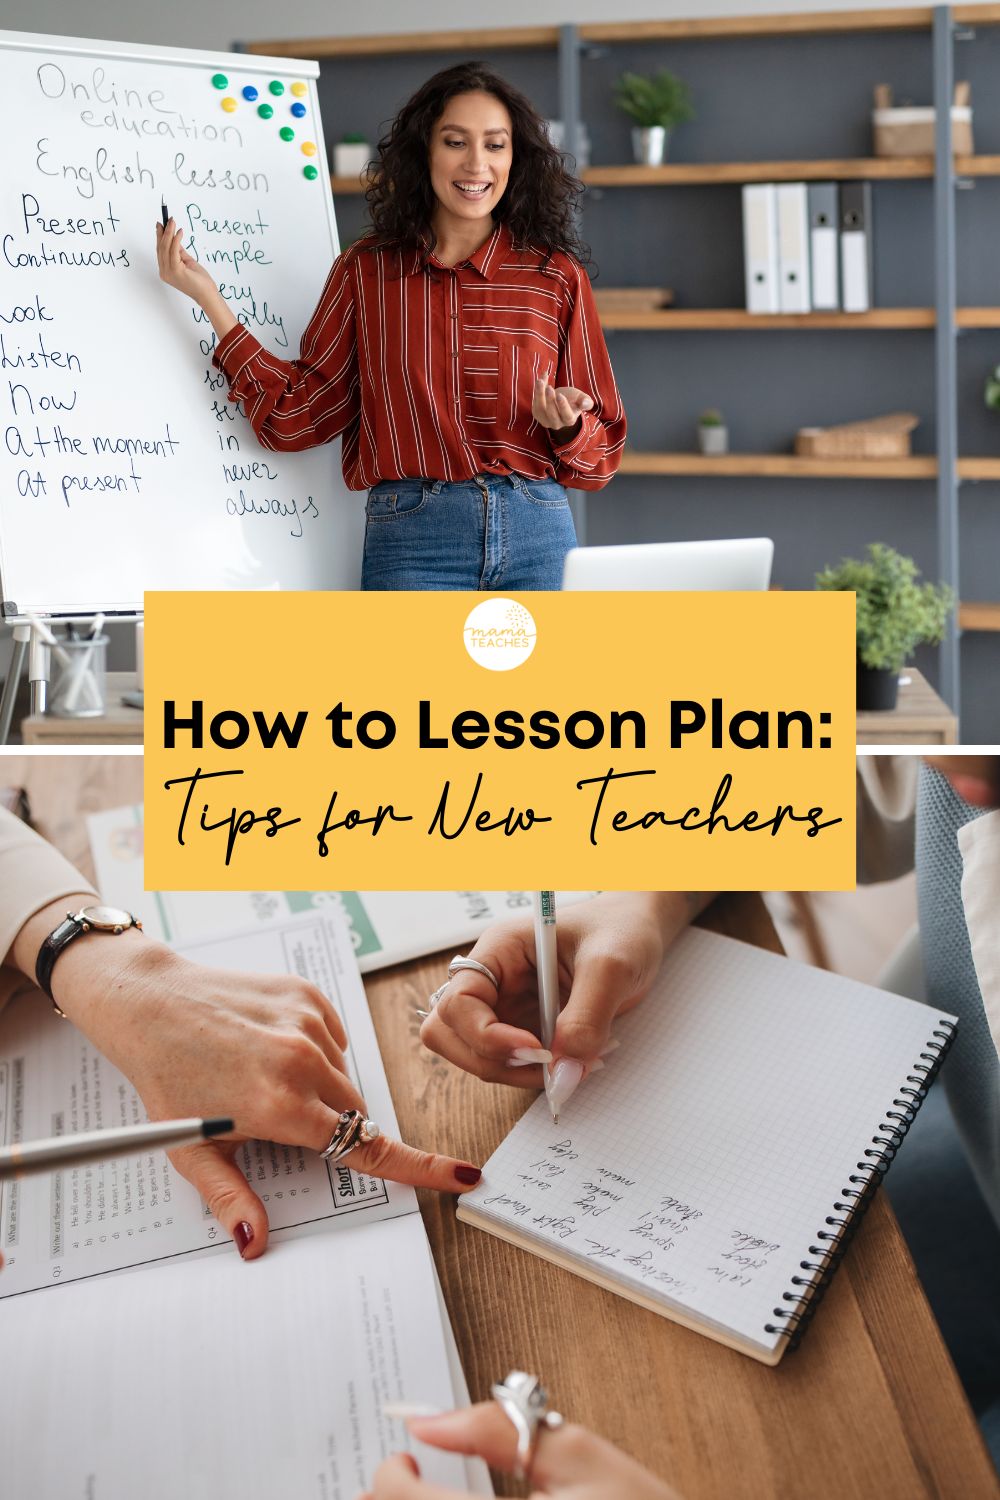 How to Lesson Plan Tips for New Teachers